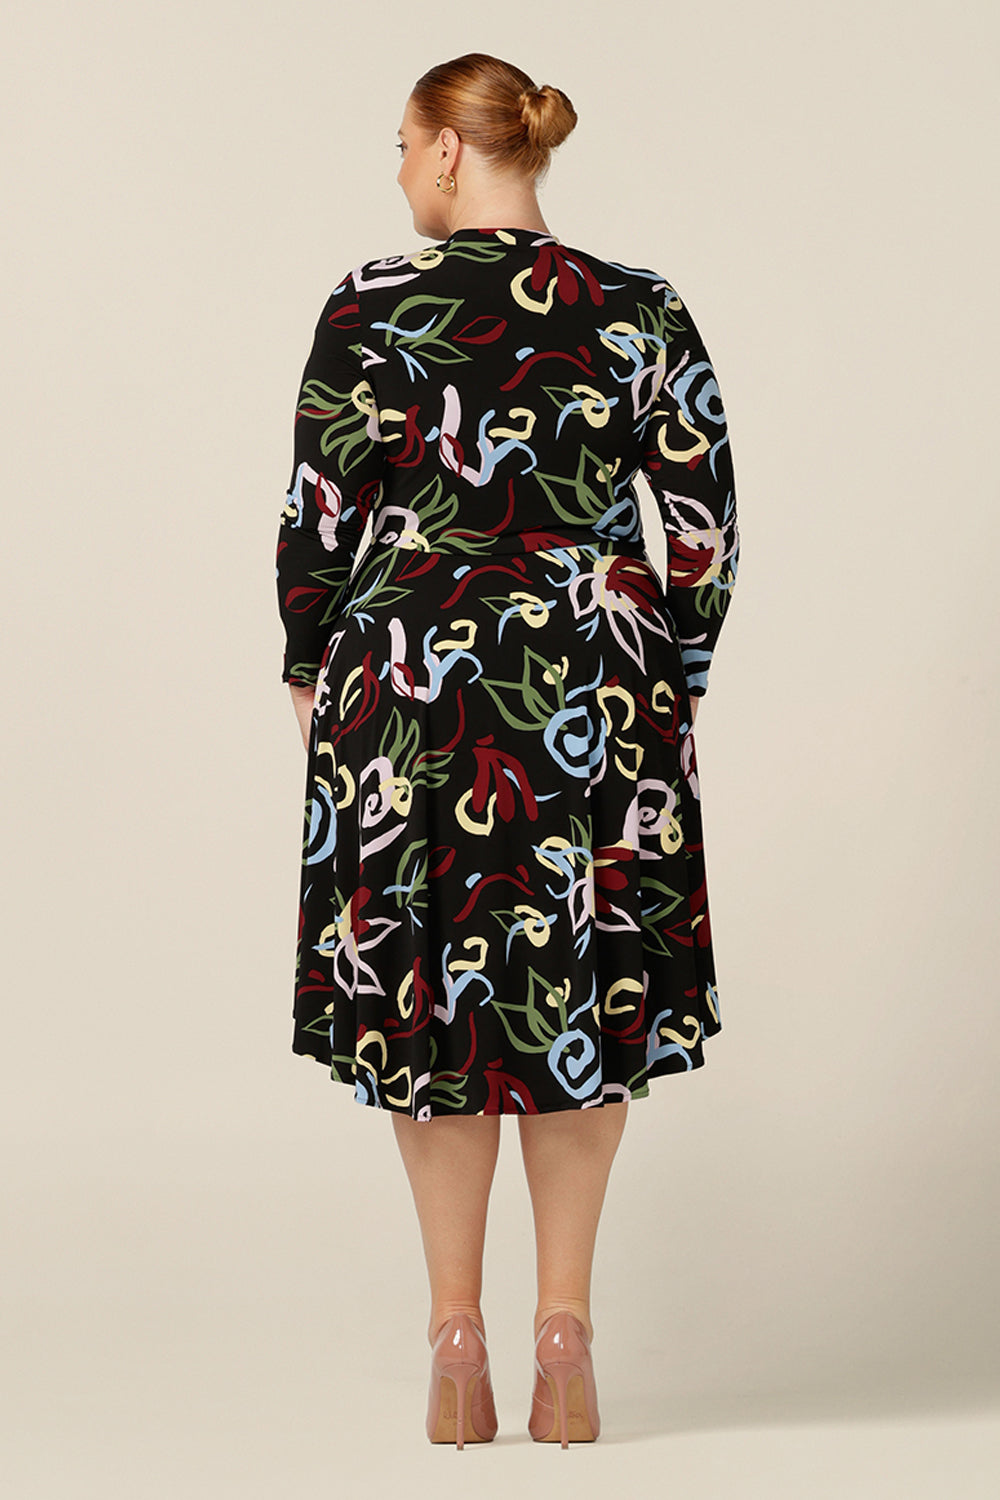 Back view of a plus size woman wearing a knee-length, jersey, work dress with long sleeves. In printed jersey, abstract patterns add colour to the black base of comfortable dress.